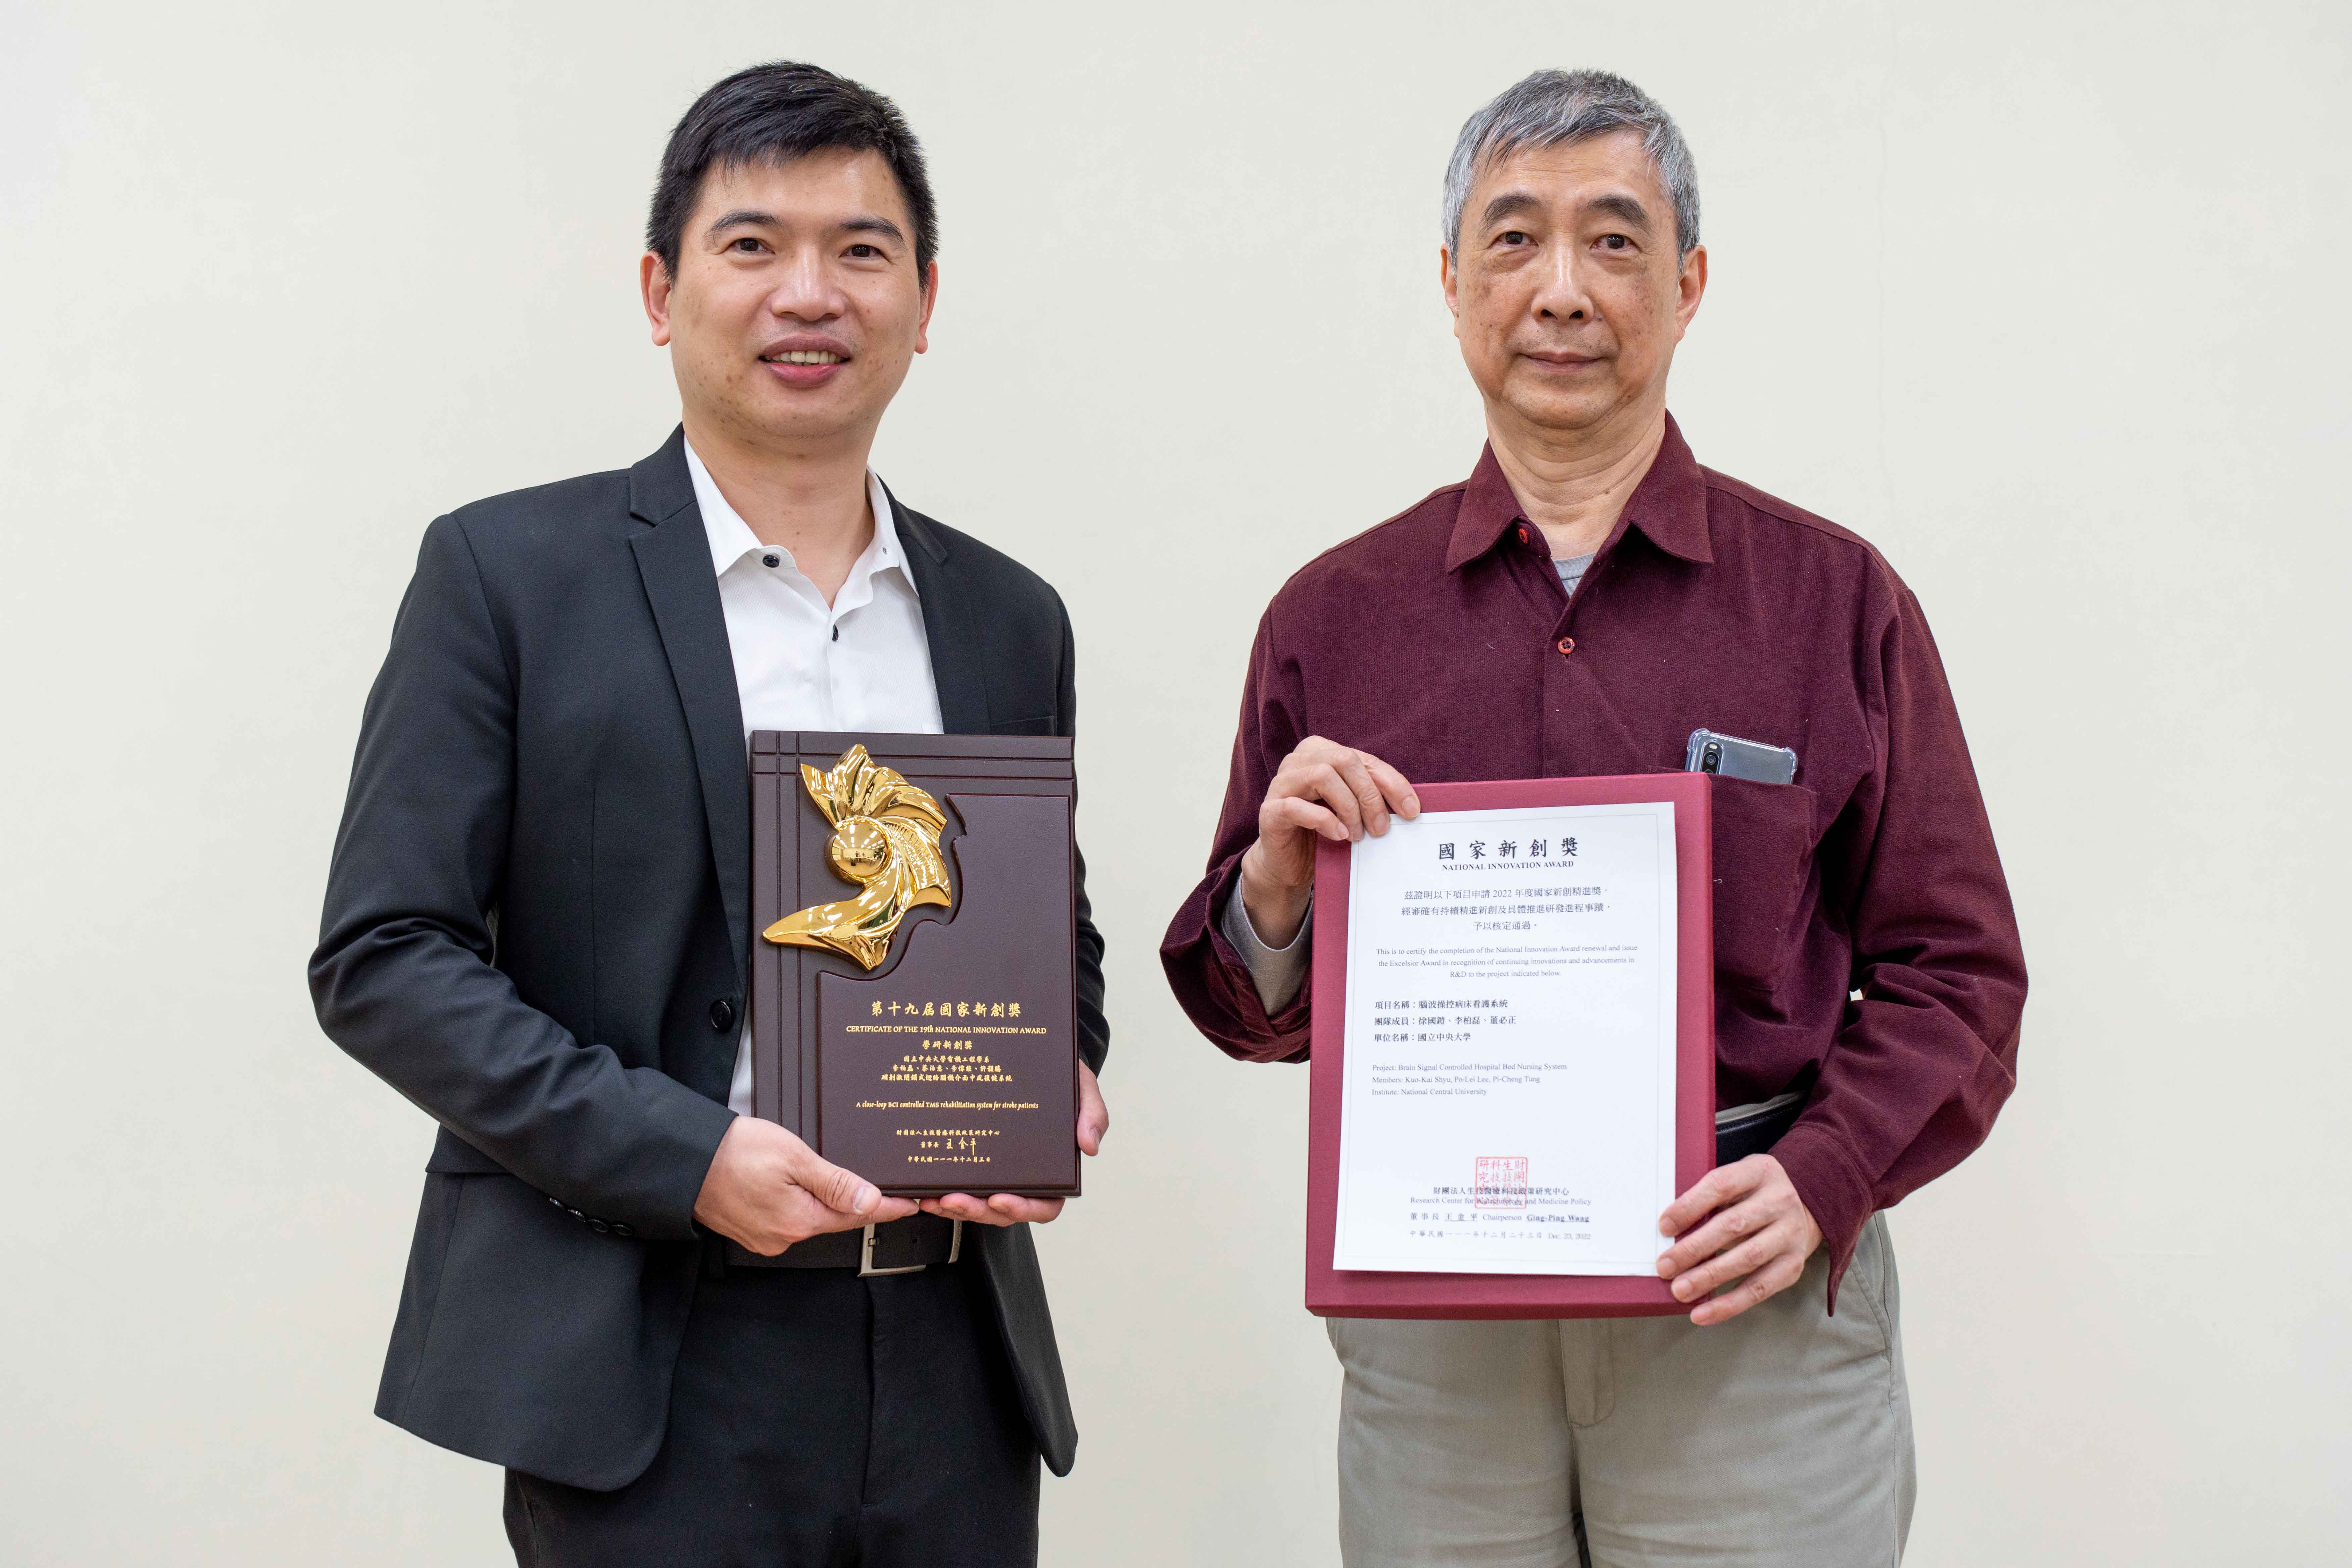 Double Recognition from National Innovation Award and Excelsior Award: Research Team at Dept. of Electrical Engineering Advanced the Technology for Caring for the Disadvantaged